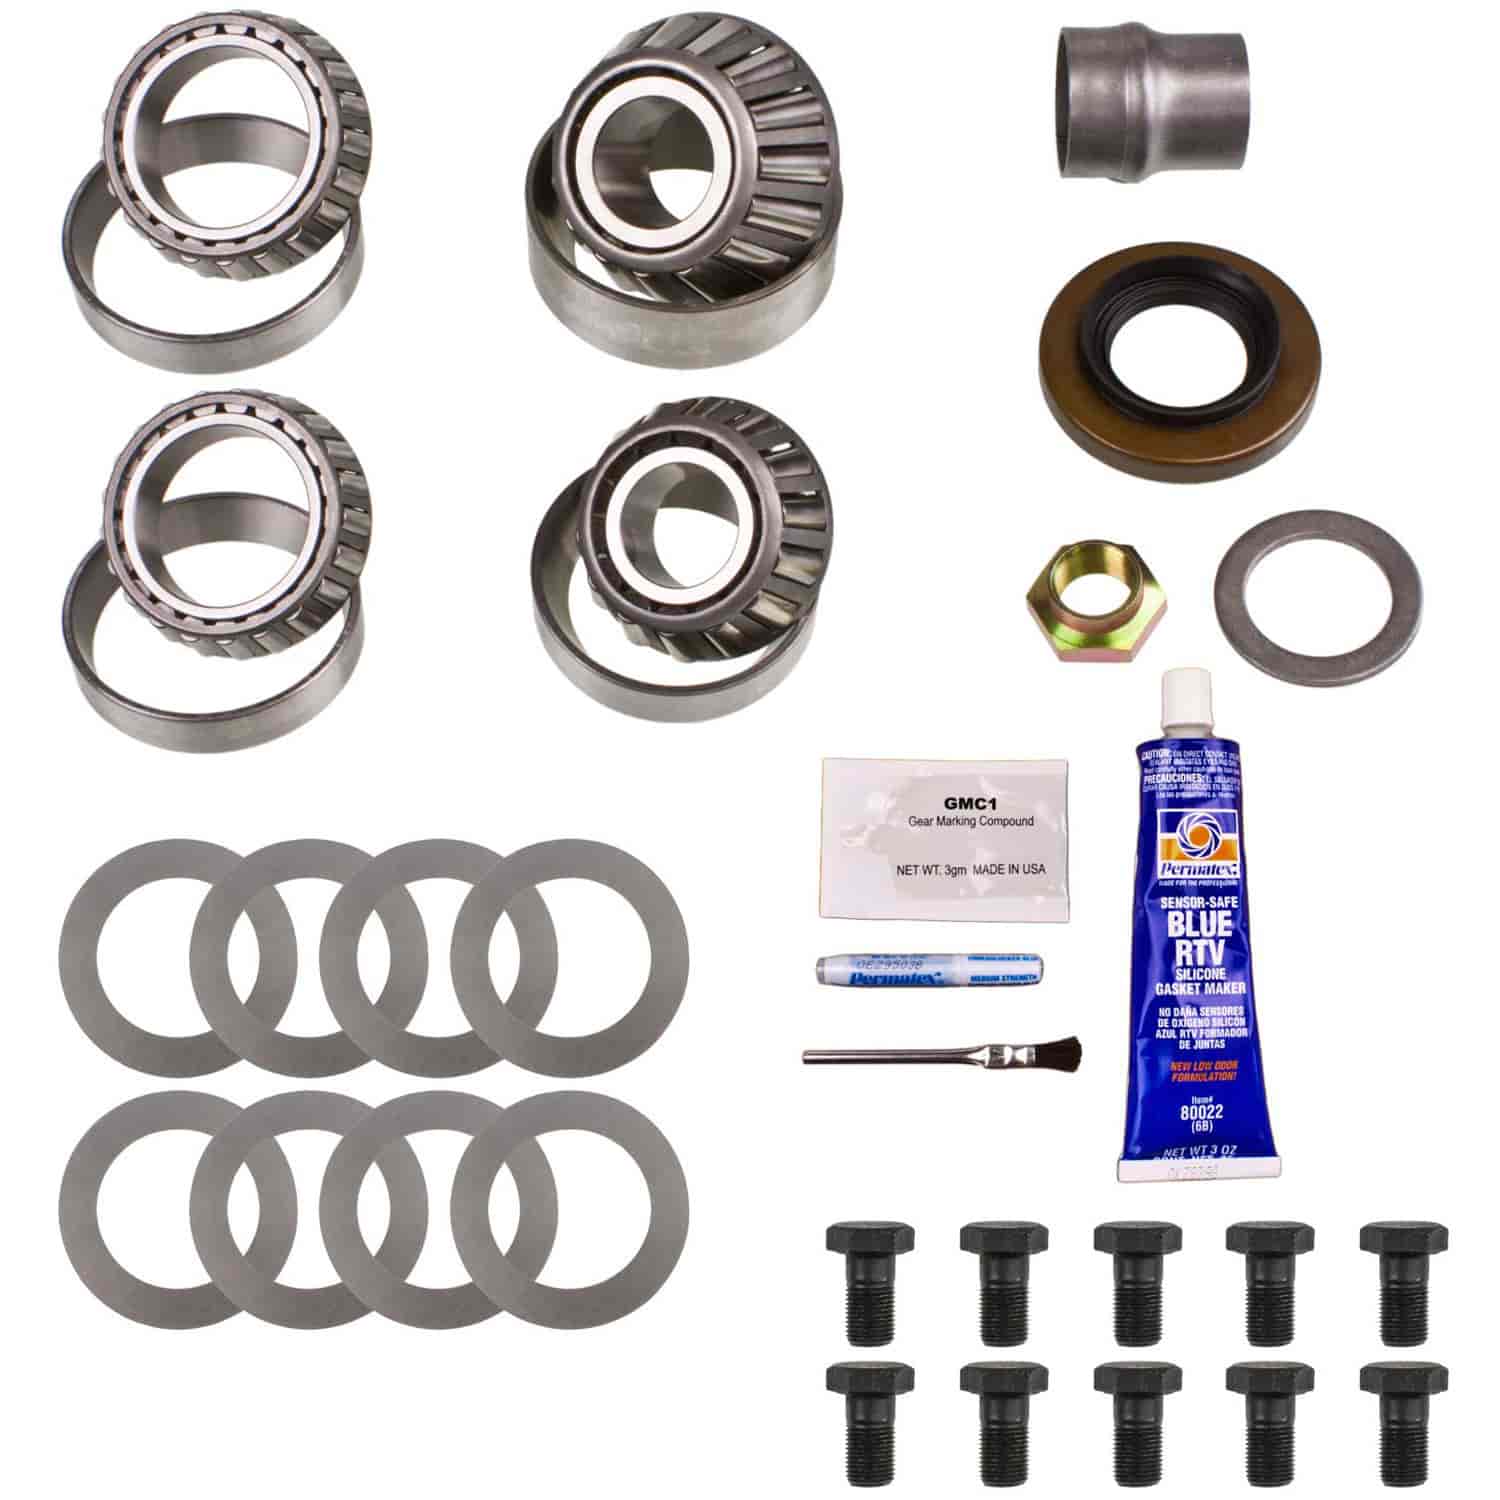 Excel; Full Ring And Pinion Install Kit; Fits Toyota V-6; Incl. Cvr Gskt/Bolts/Washers/Crush Sleeve/